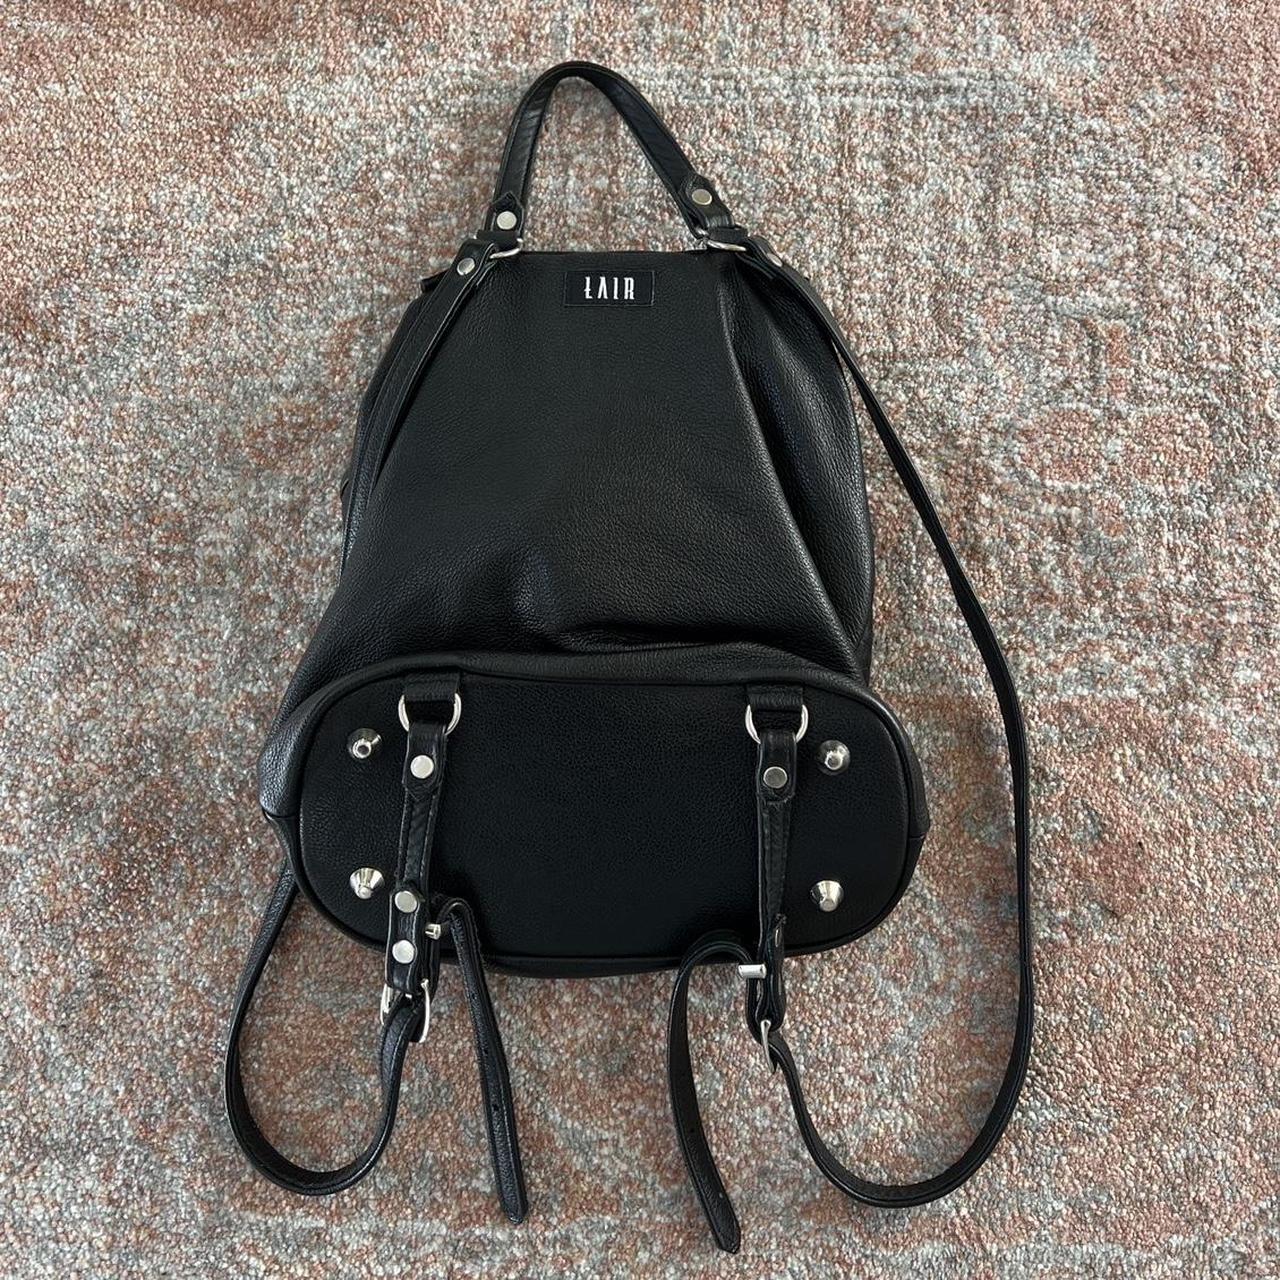 The Lair Leather Backpack Small to Medium sized... - Depop